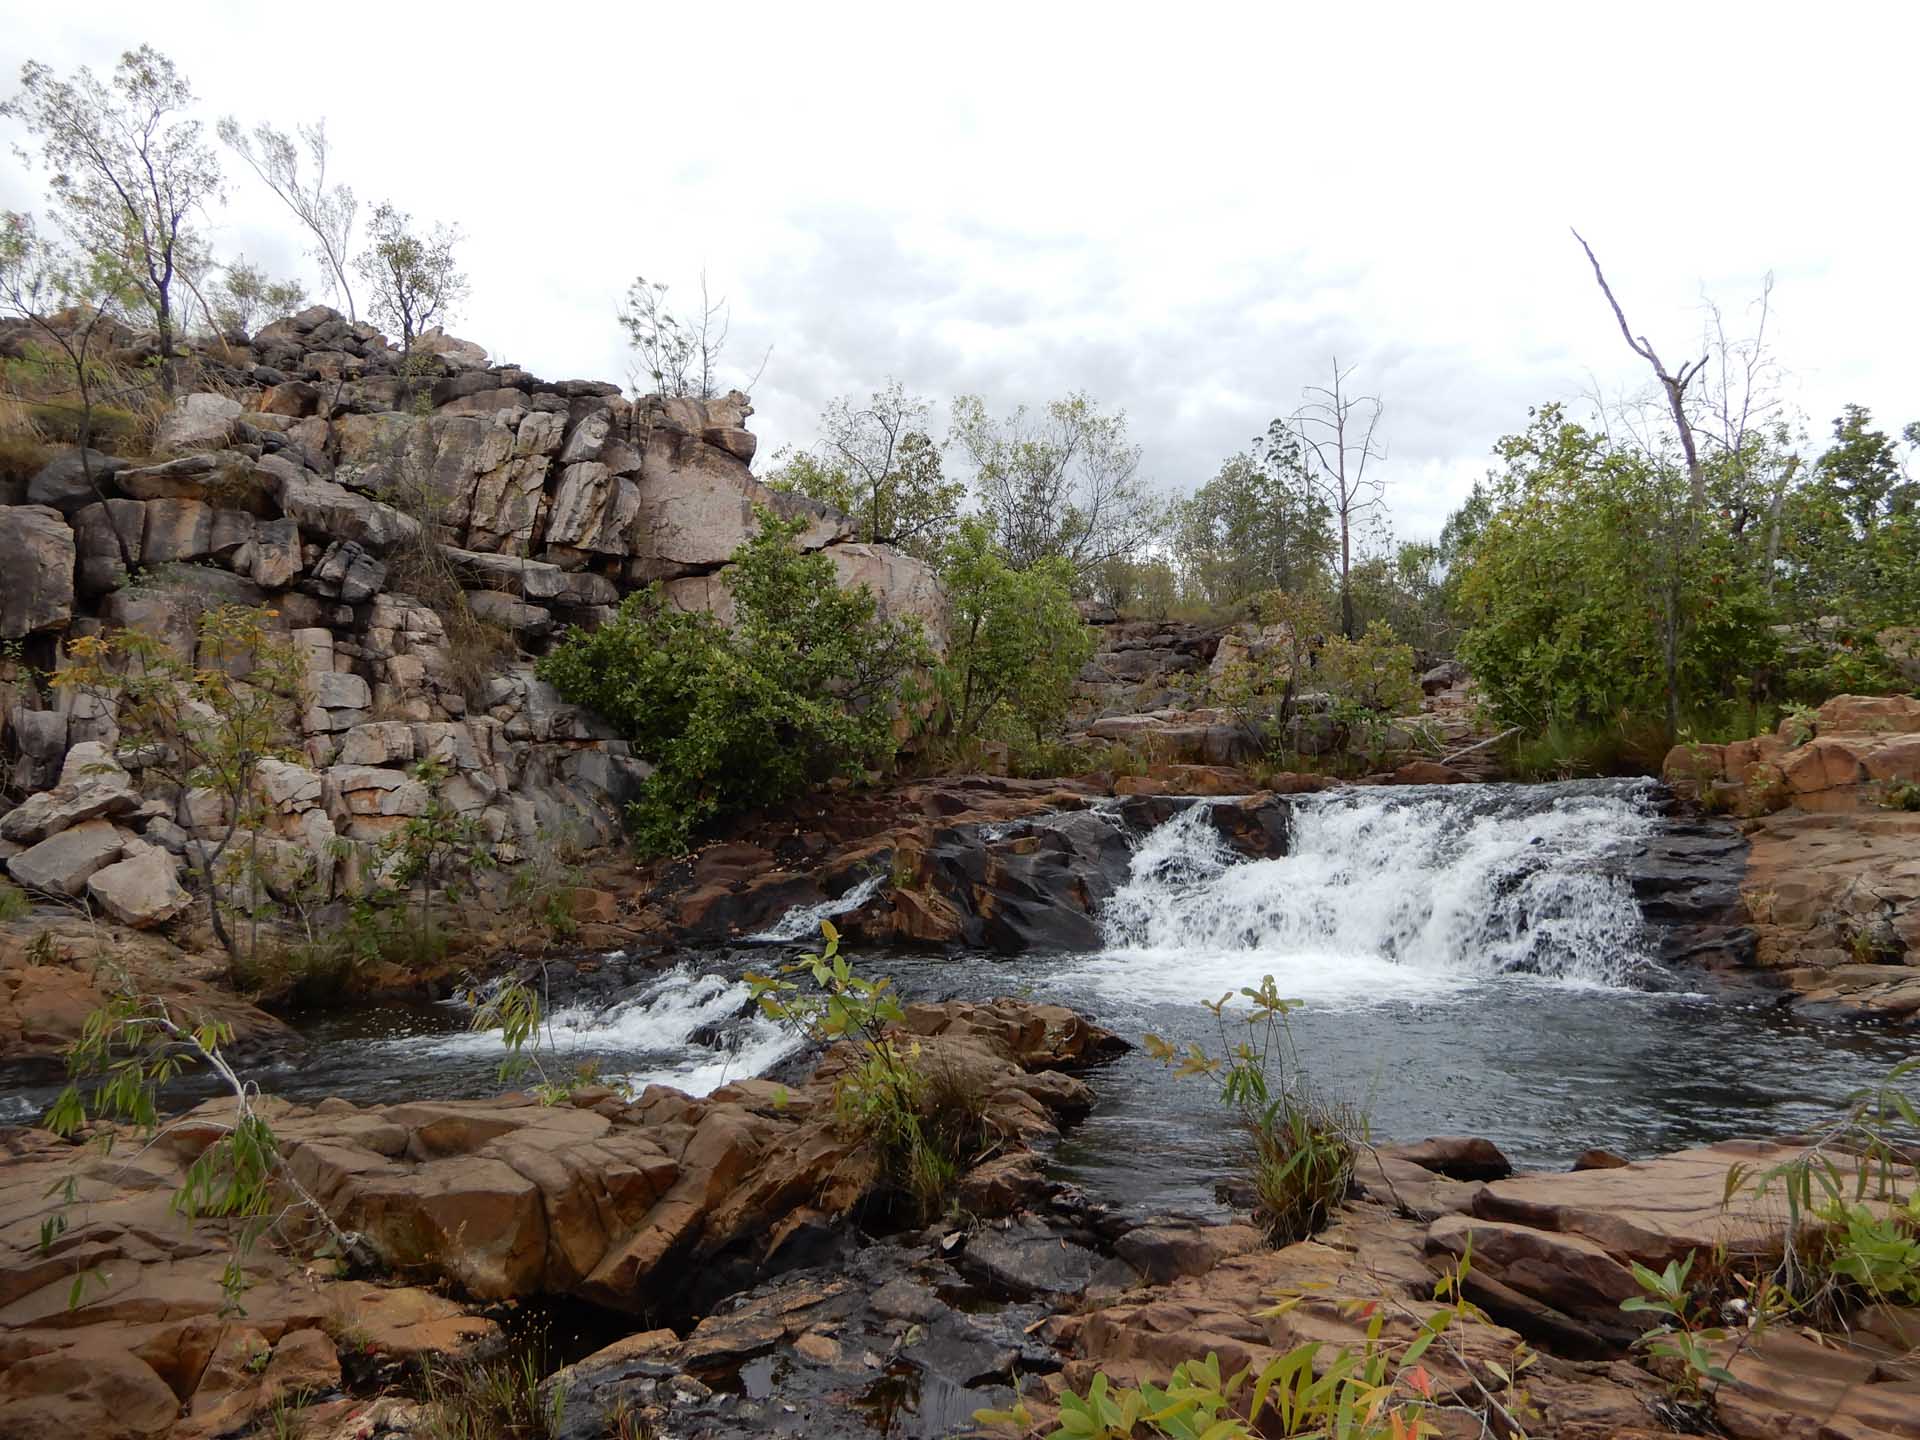 The ‘Big 3’ Hikes of the NT: How Do They Compare?, hiking, northern territory, jatbula trail, mountains, indigenous culture, multi-day hike, waterfall and scrub on the jatbula trail in th northern territory